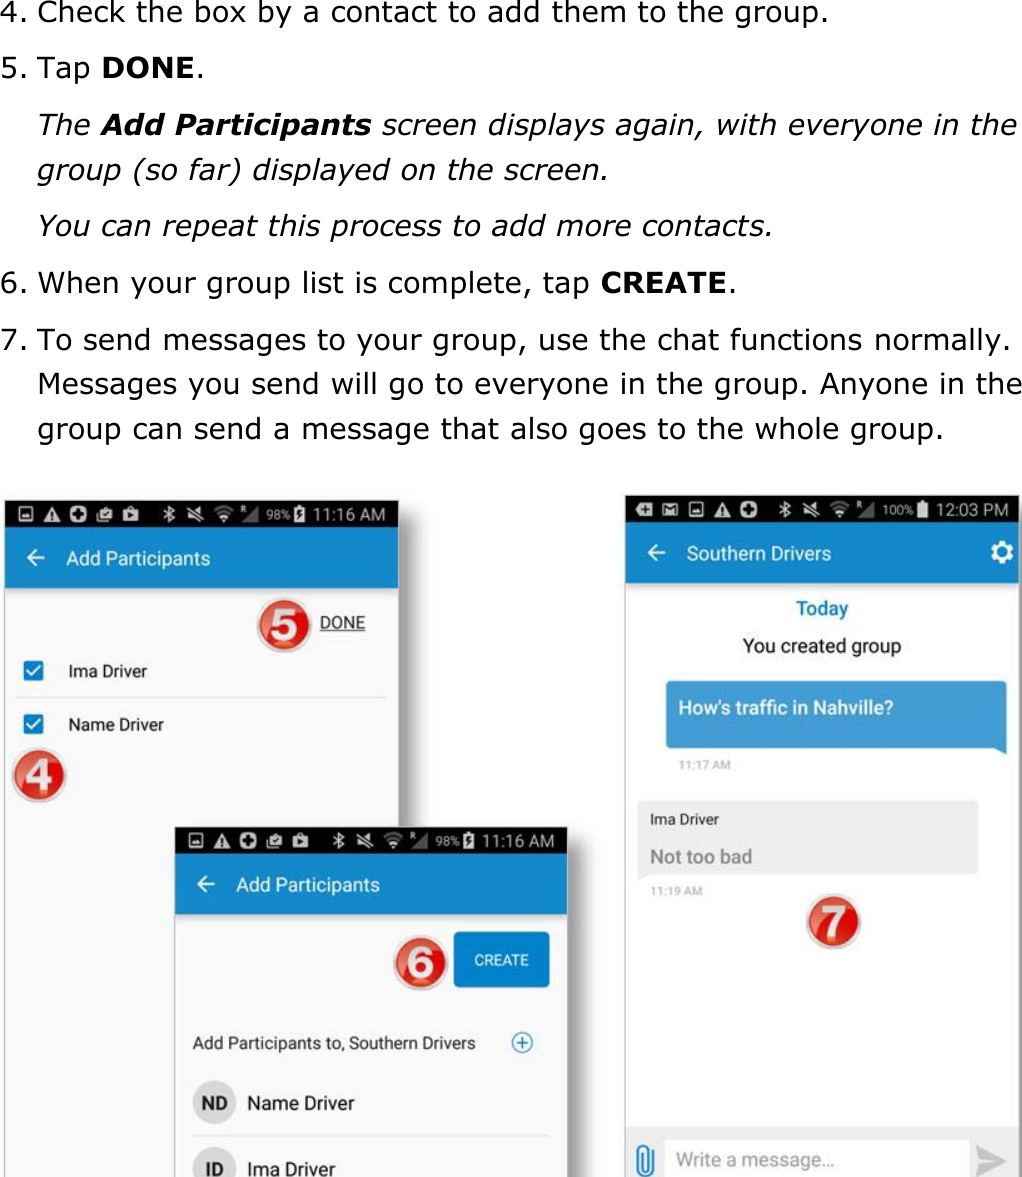 Send Messages, Forms, and Workflows DriverConnect User Guide  72 © 2016-2017, Rand McNally, Inc. 4. Check the box by a contact to add them to the group. 5. Tap DONE. The Add Participants screen displays again, with everyone in the group (so far) displayed on the screen. You can repeat this process to add more contacts. 6. When your group list is complete, tap CREATE. 7. To send messages to your group, use the chat functions normally. Messages you send will go to everyone in the group. Anyone in the group can send a message that also goes to the whole group.    